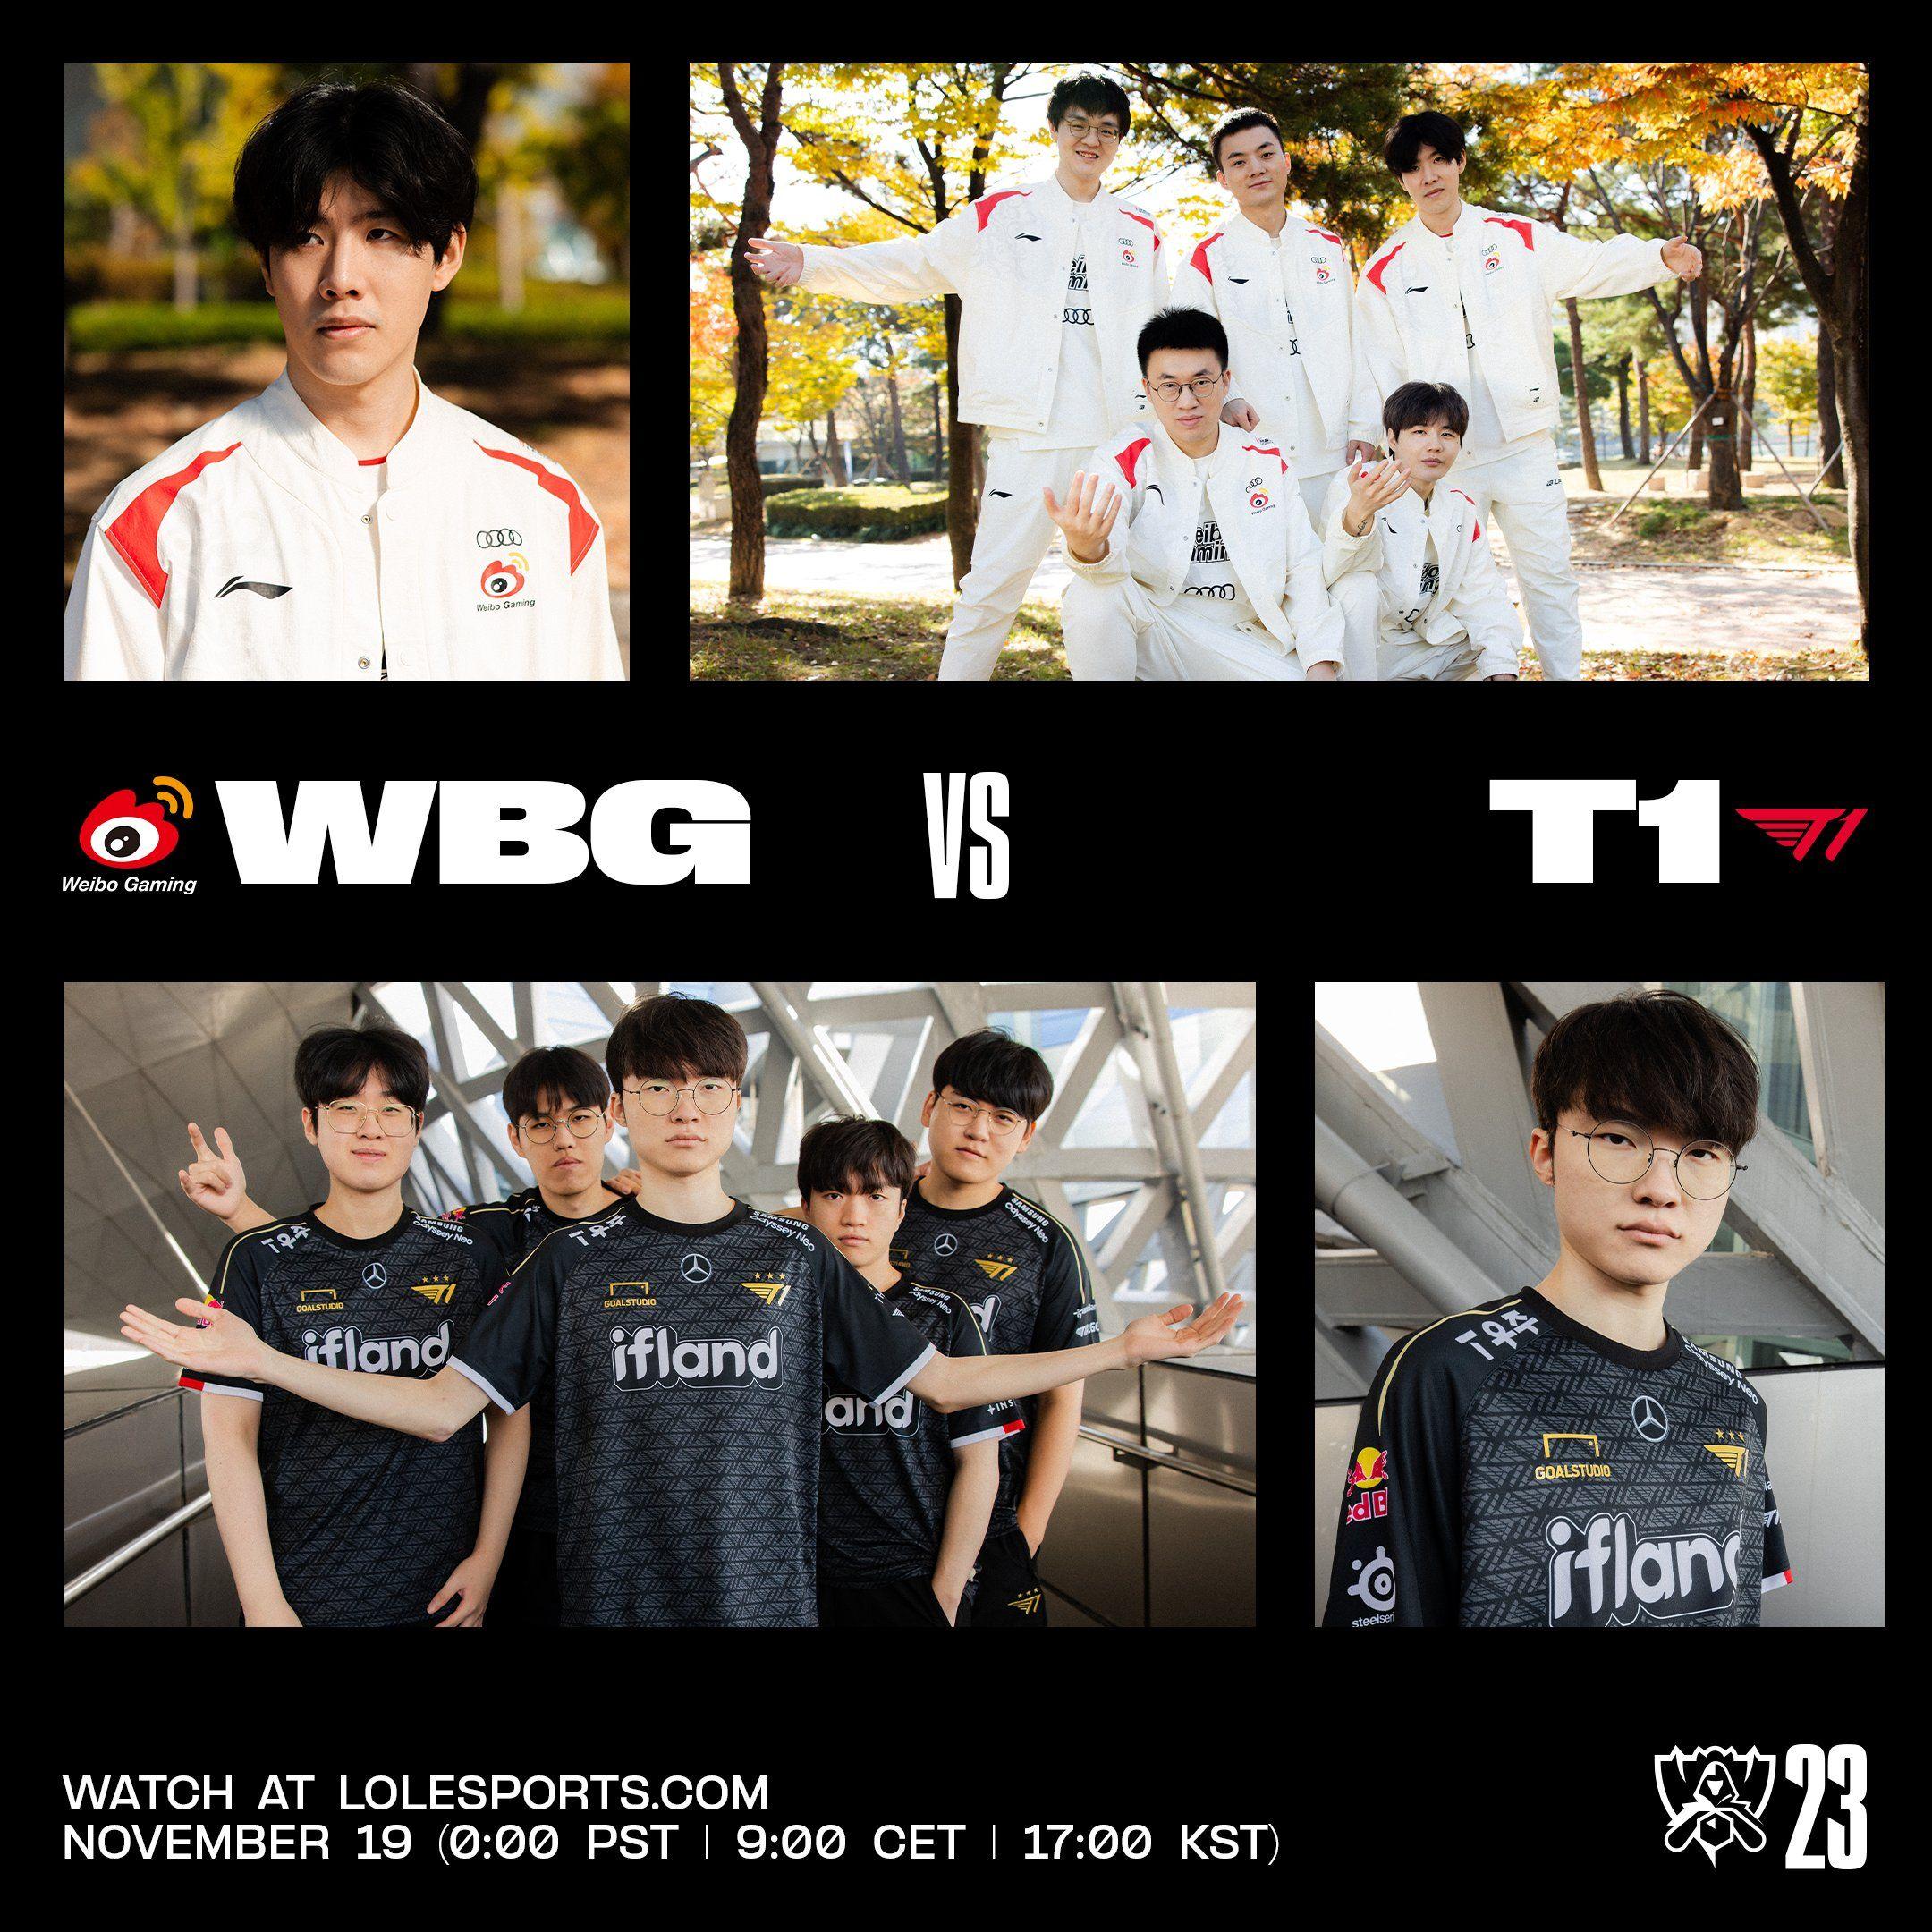 T1 - Weibo Gaming Match Is The Main Event In Esports. We Found 4 Reasons Why This Is So